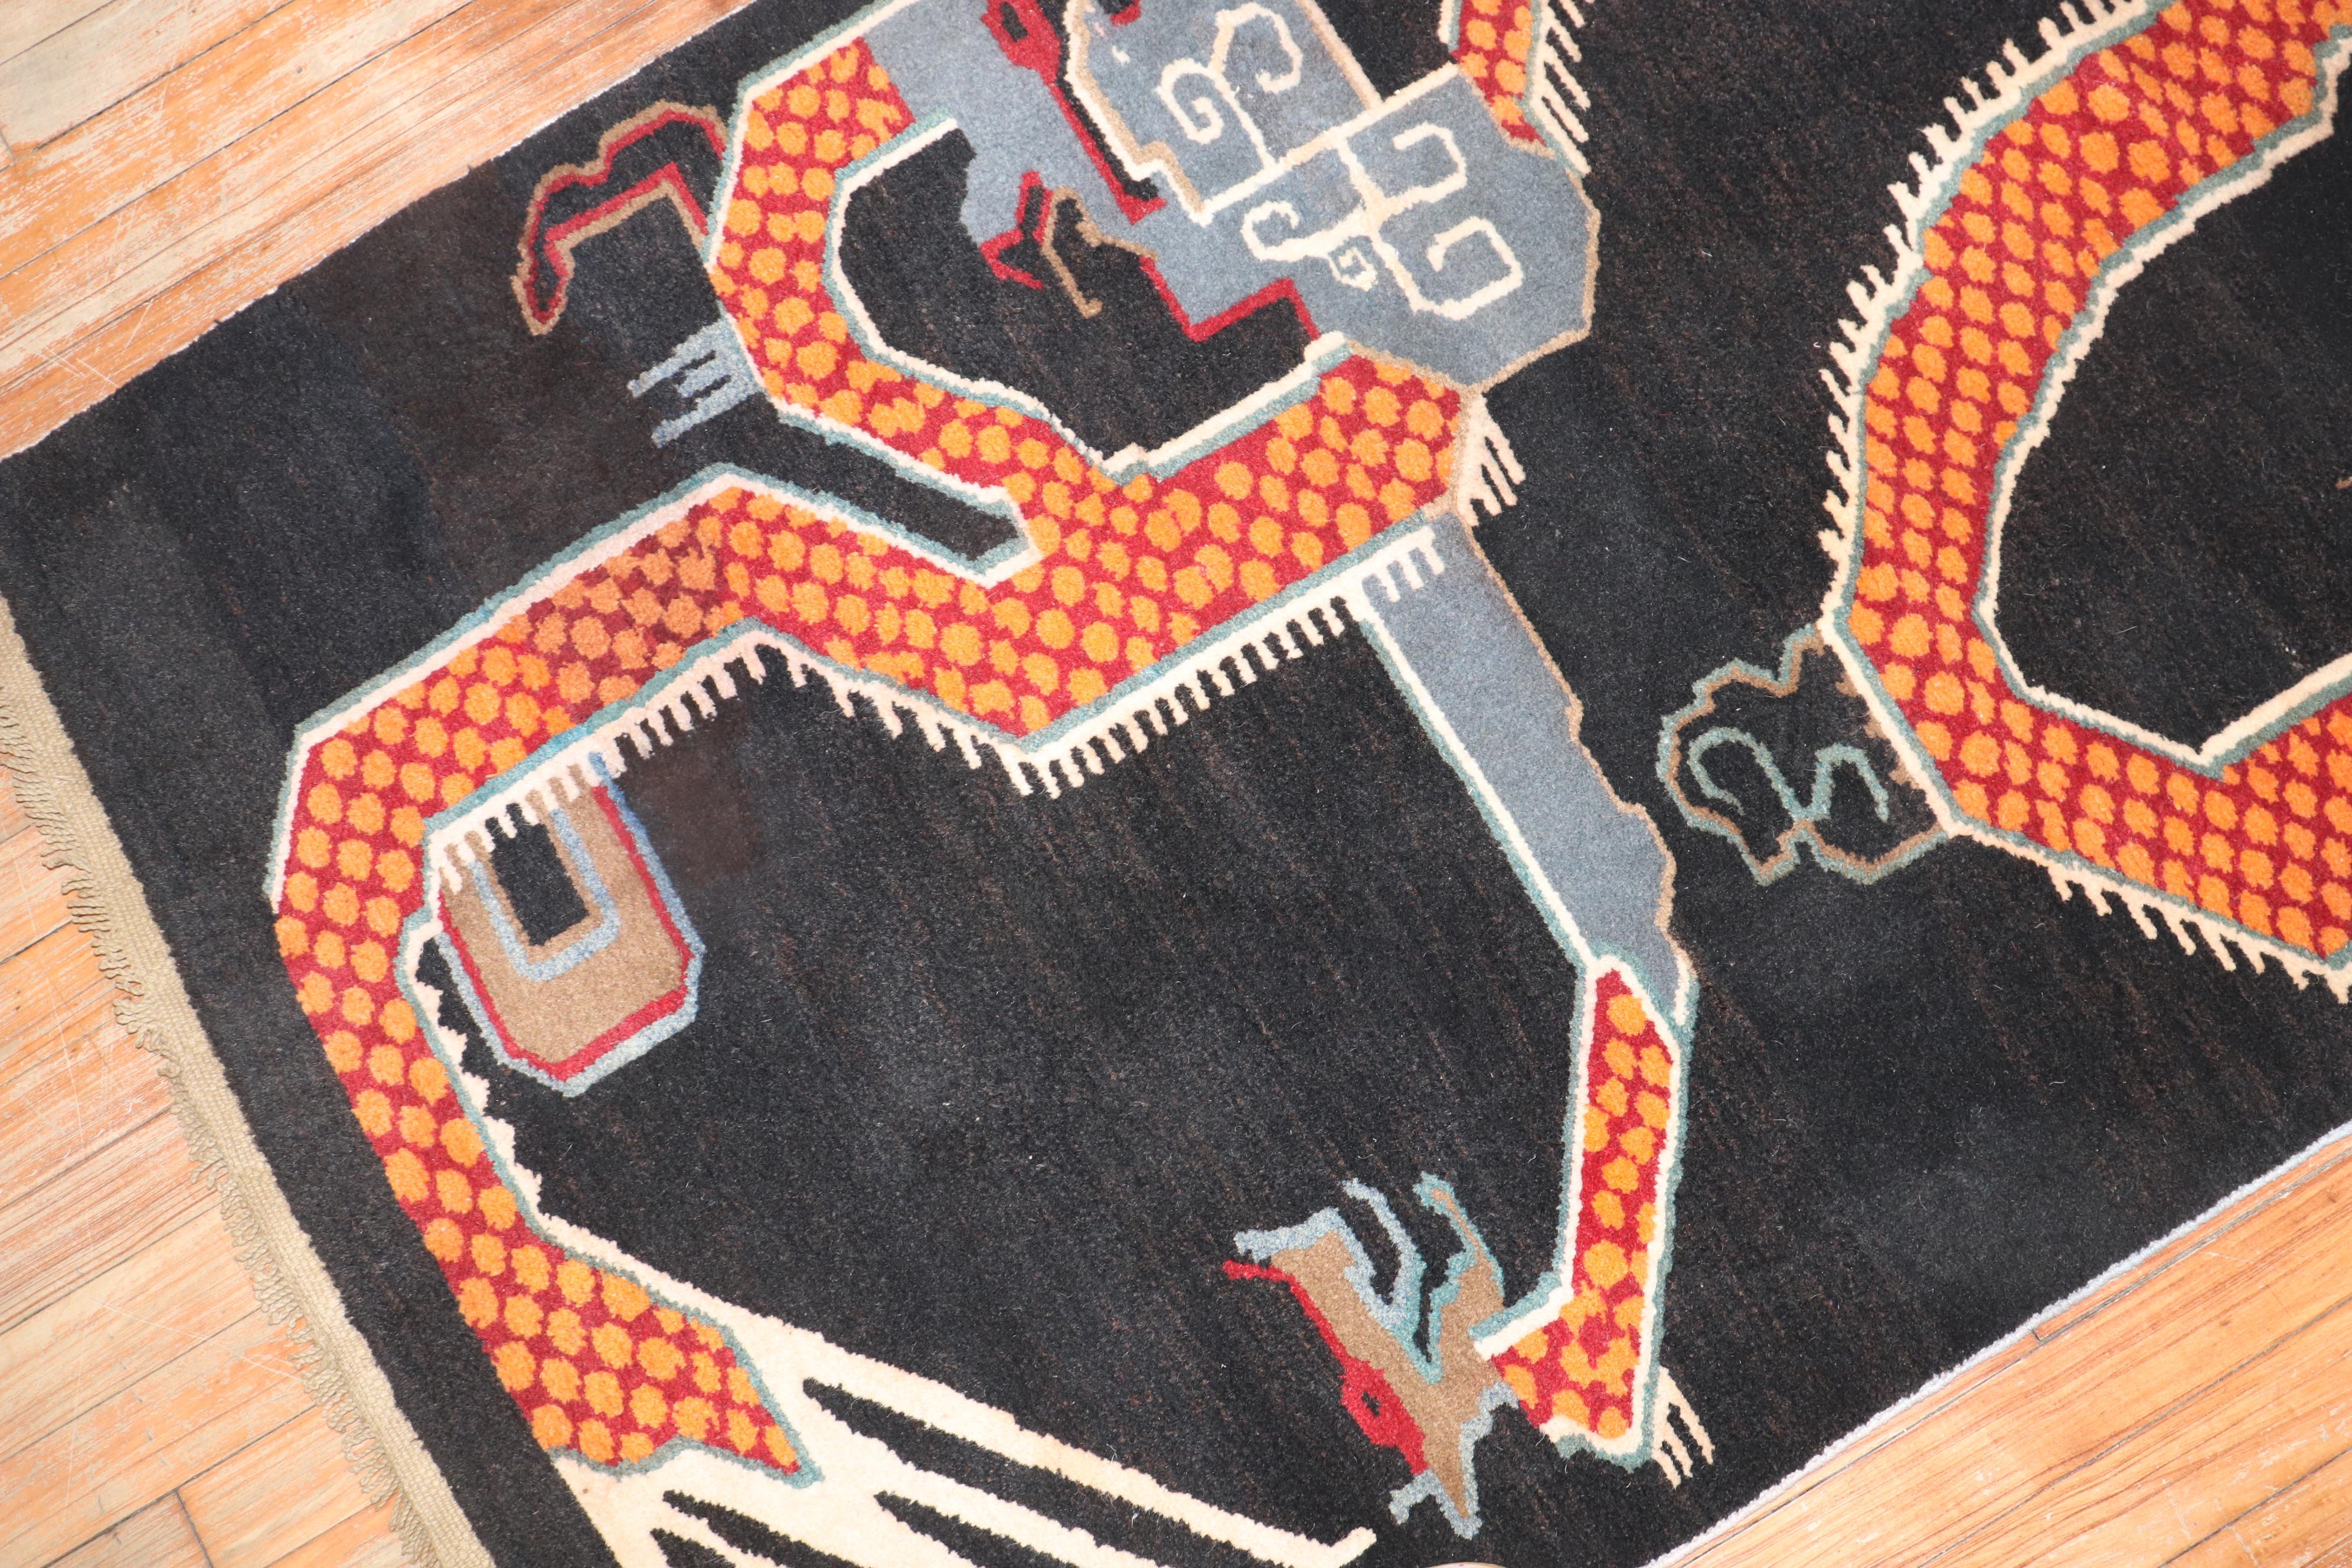 A 3rd quarter of the 20th century Tibetan rug depicting a large orange dragon.

Measures: 3'2